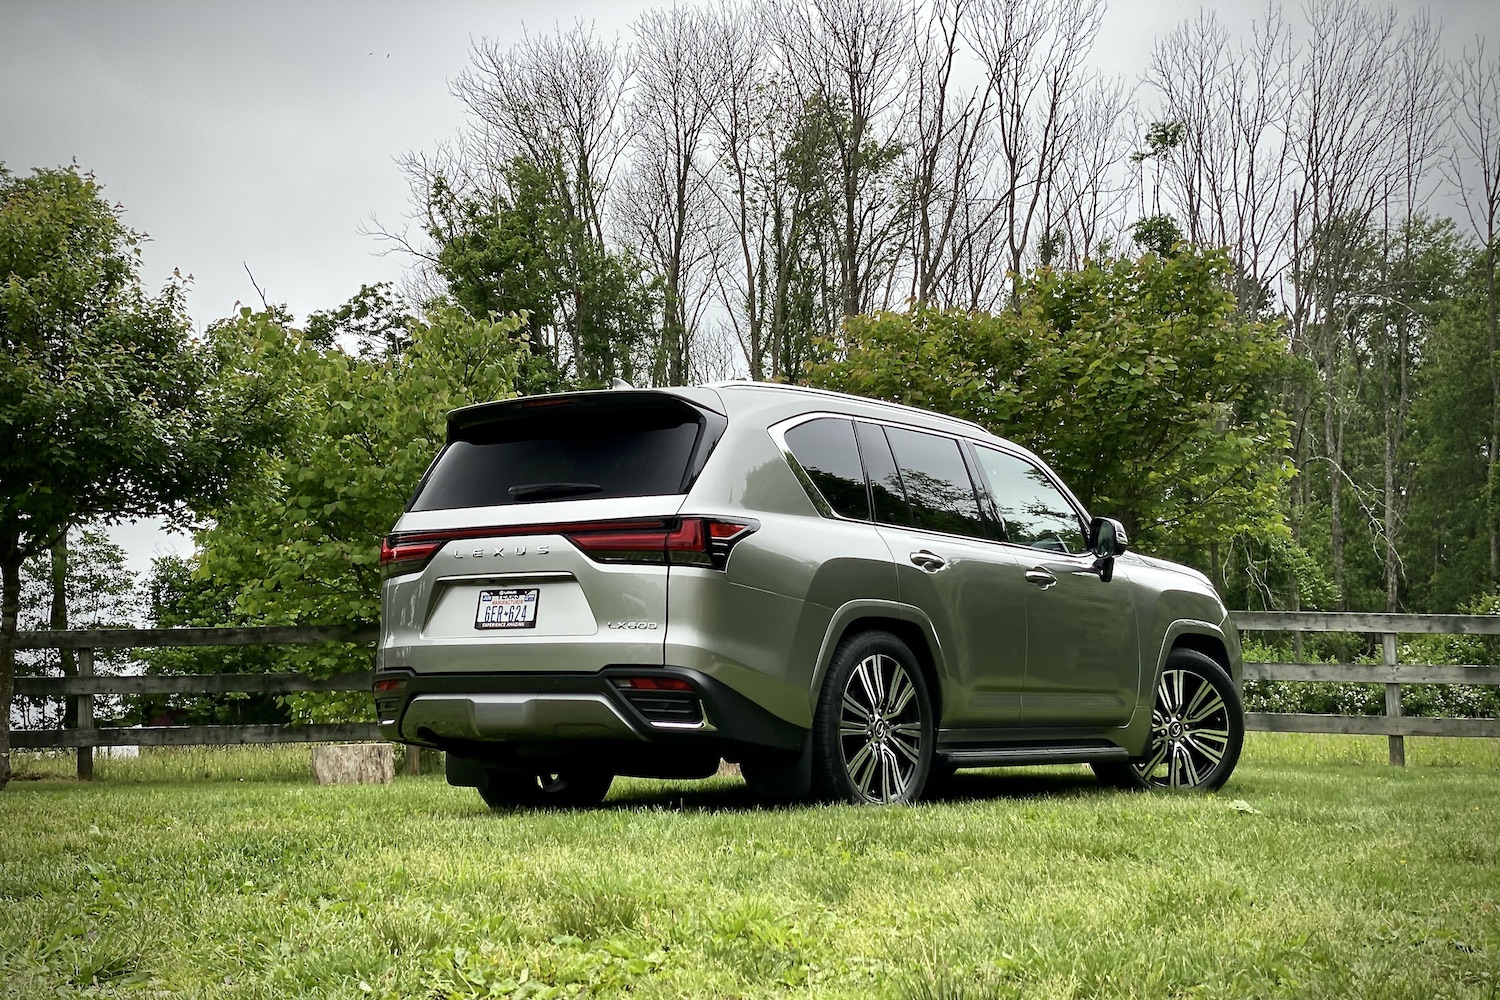 Rear end angle of 2022 Lexus LX 600 from passenger's side on a grassy field with trees in the back.